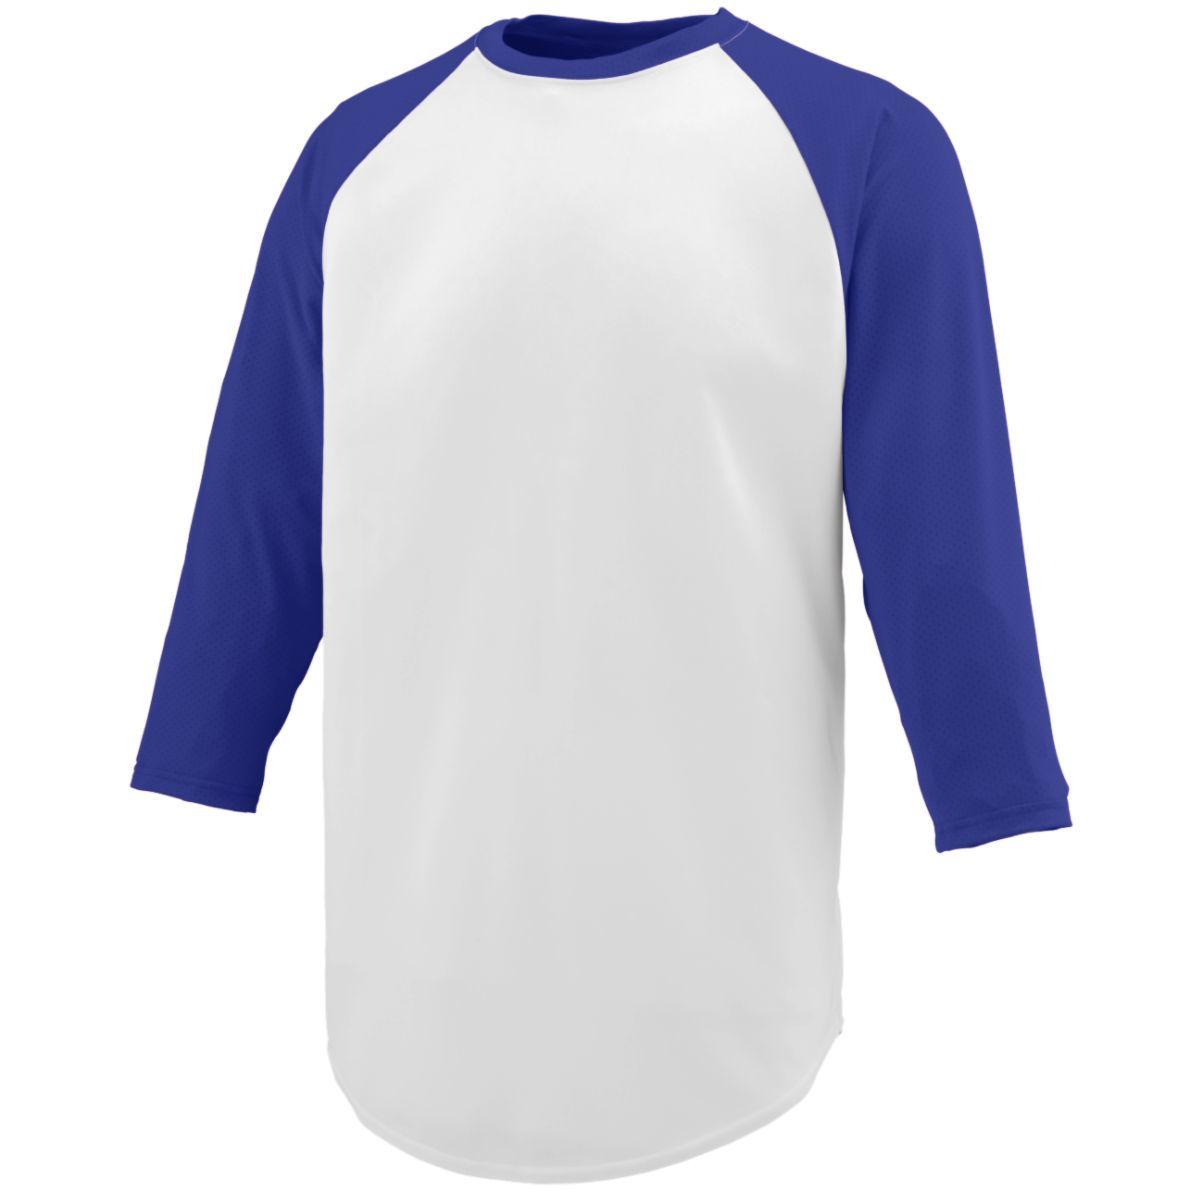 Augusta Sportswear Nova Jersey in White/Purple  -Part of the Adult, Adult-Jersey, Augusta-Products, Baseball, Shirts, All-Sports, All-Sports-1 product lines at KanaleyCreations.com